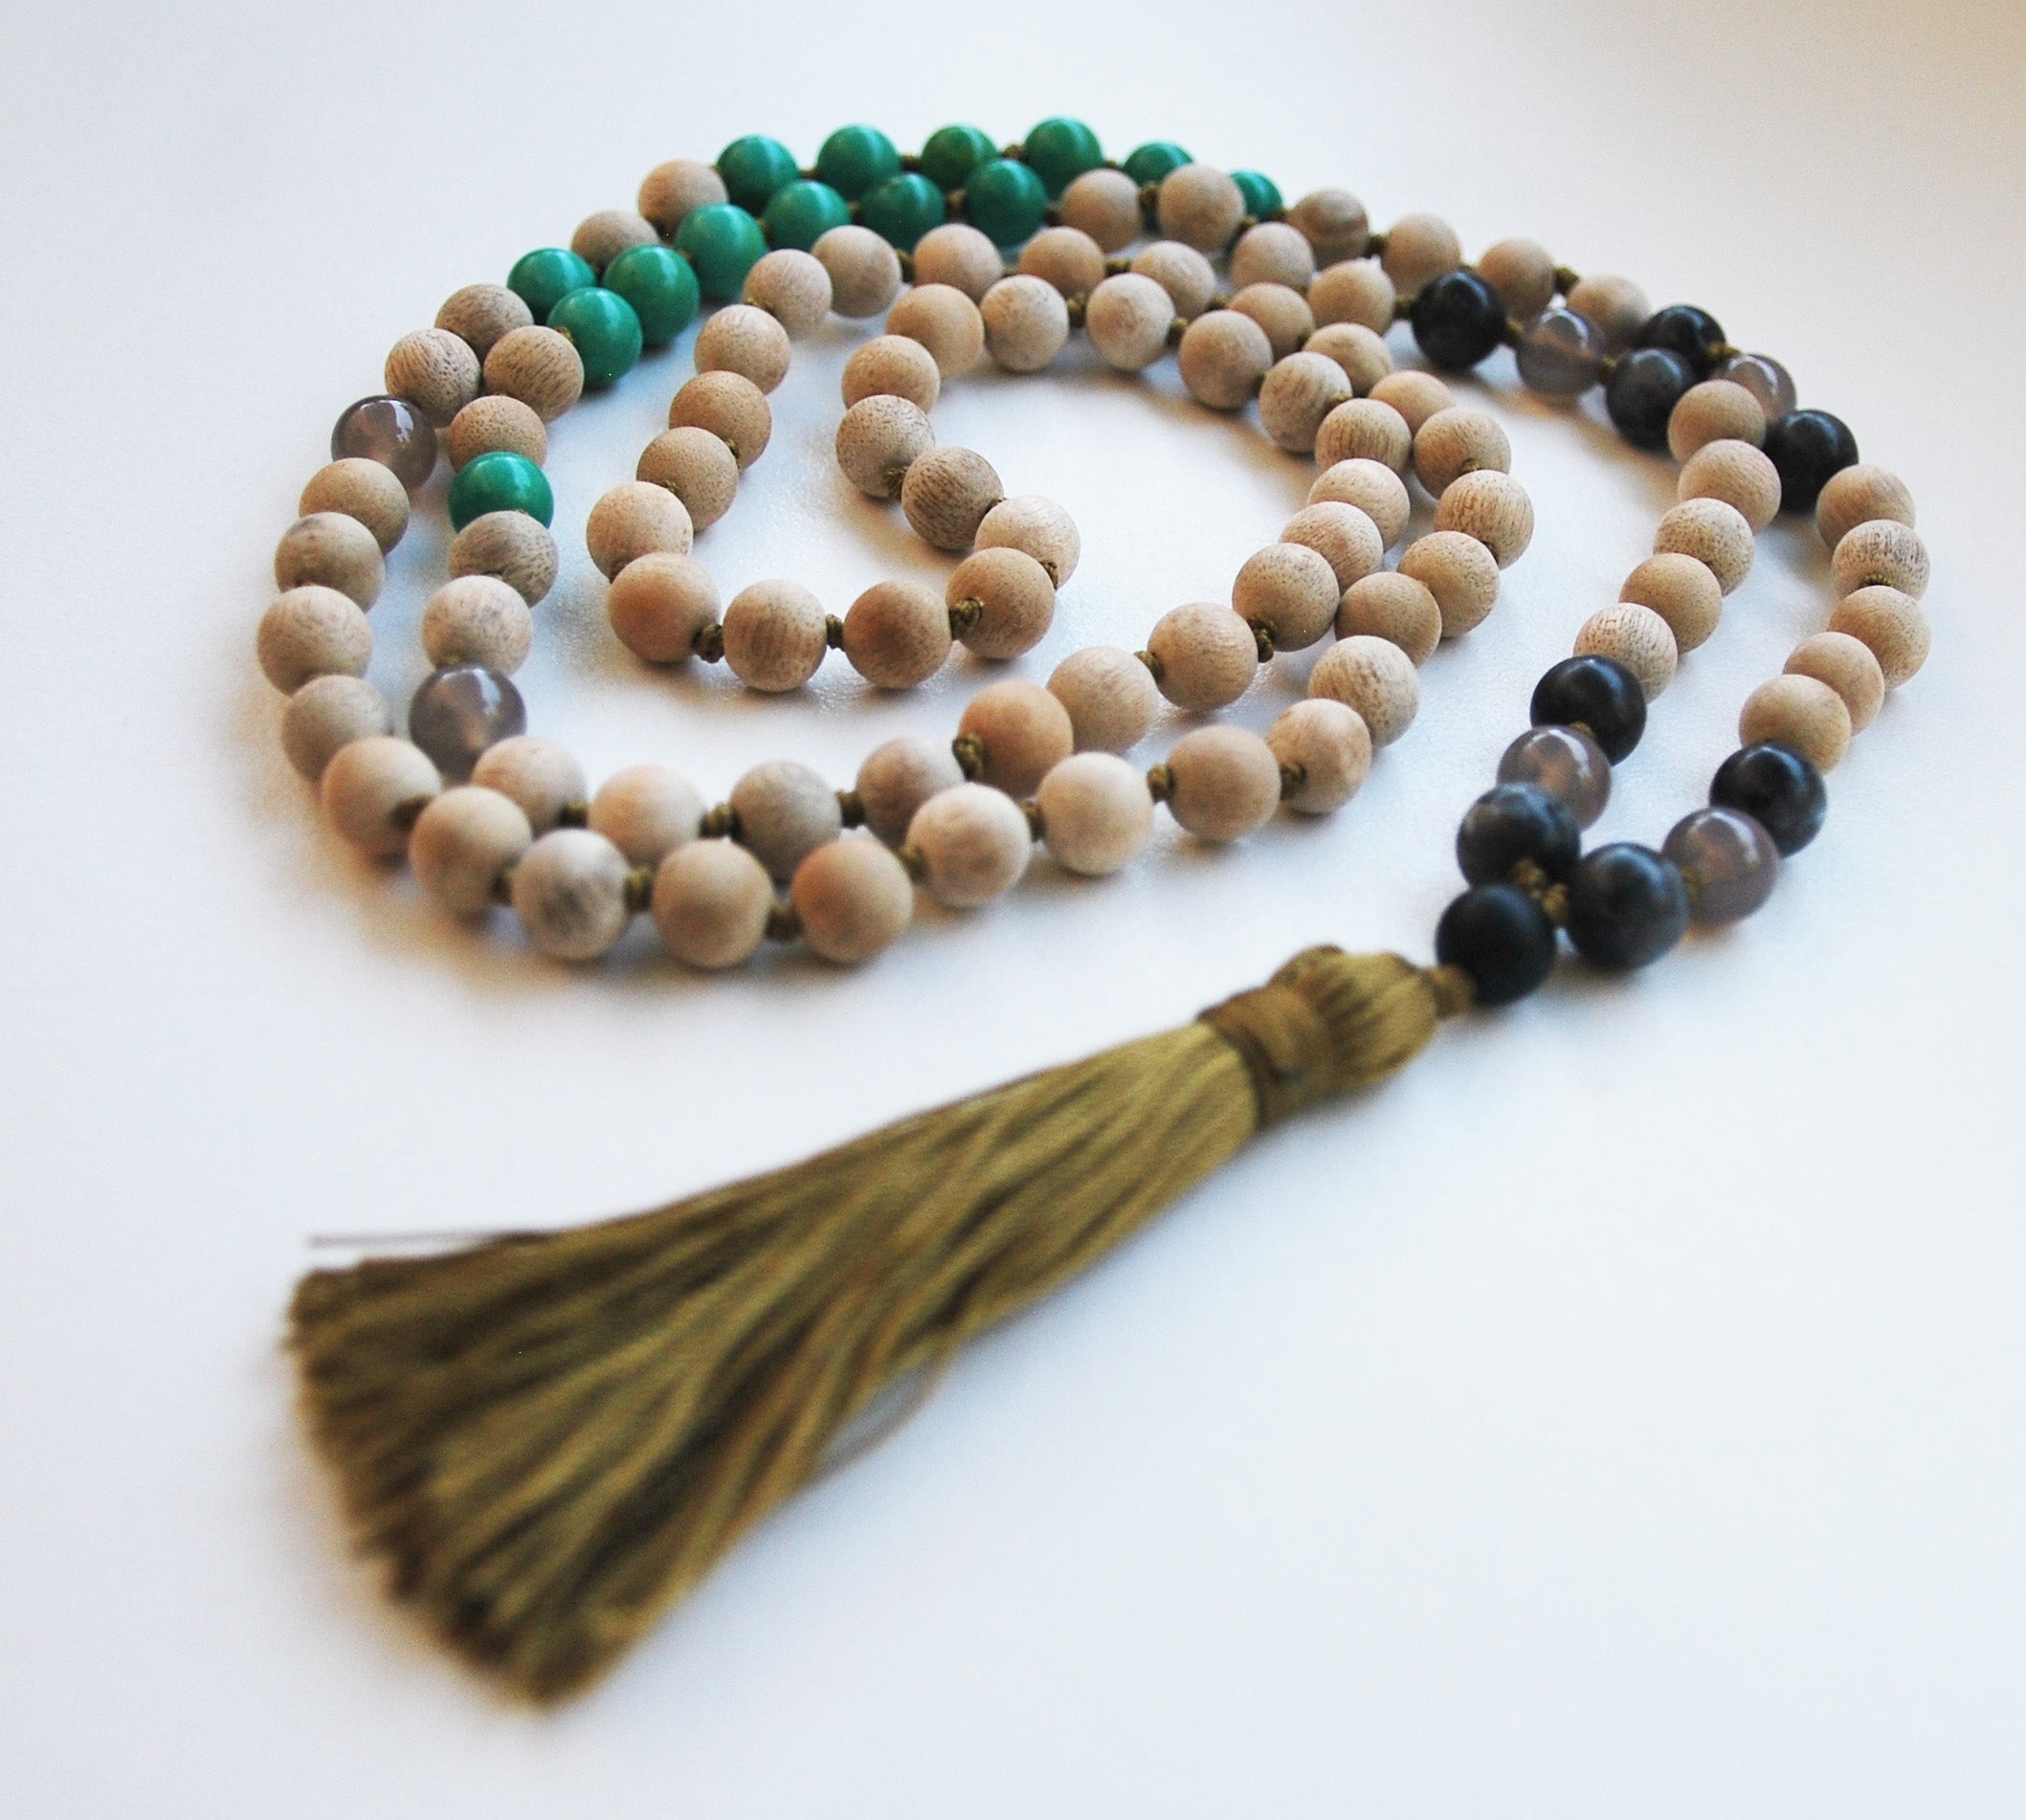 8mm Sandalwood & Turquoise 108 Knotted Mala Necklace with Colored Tassel